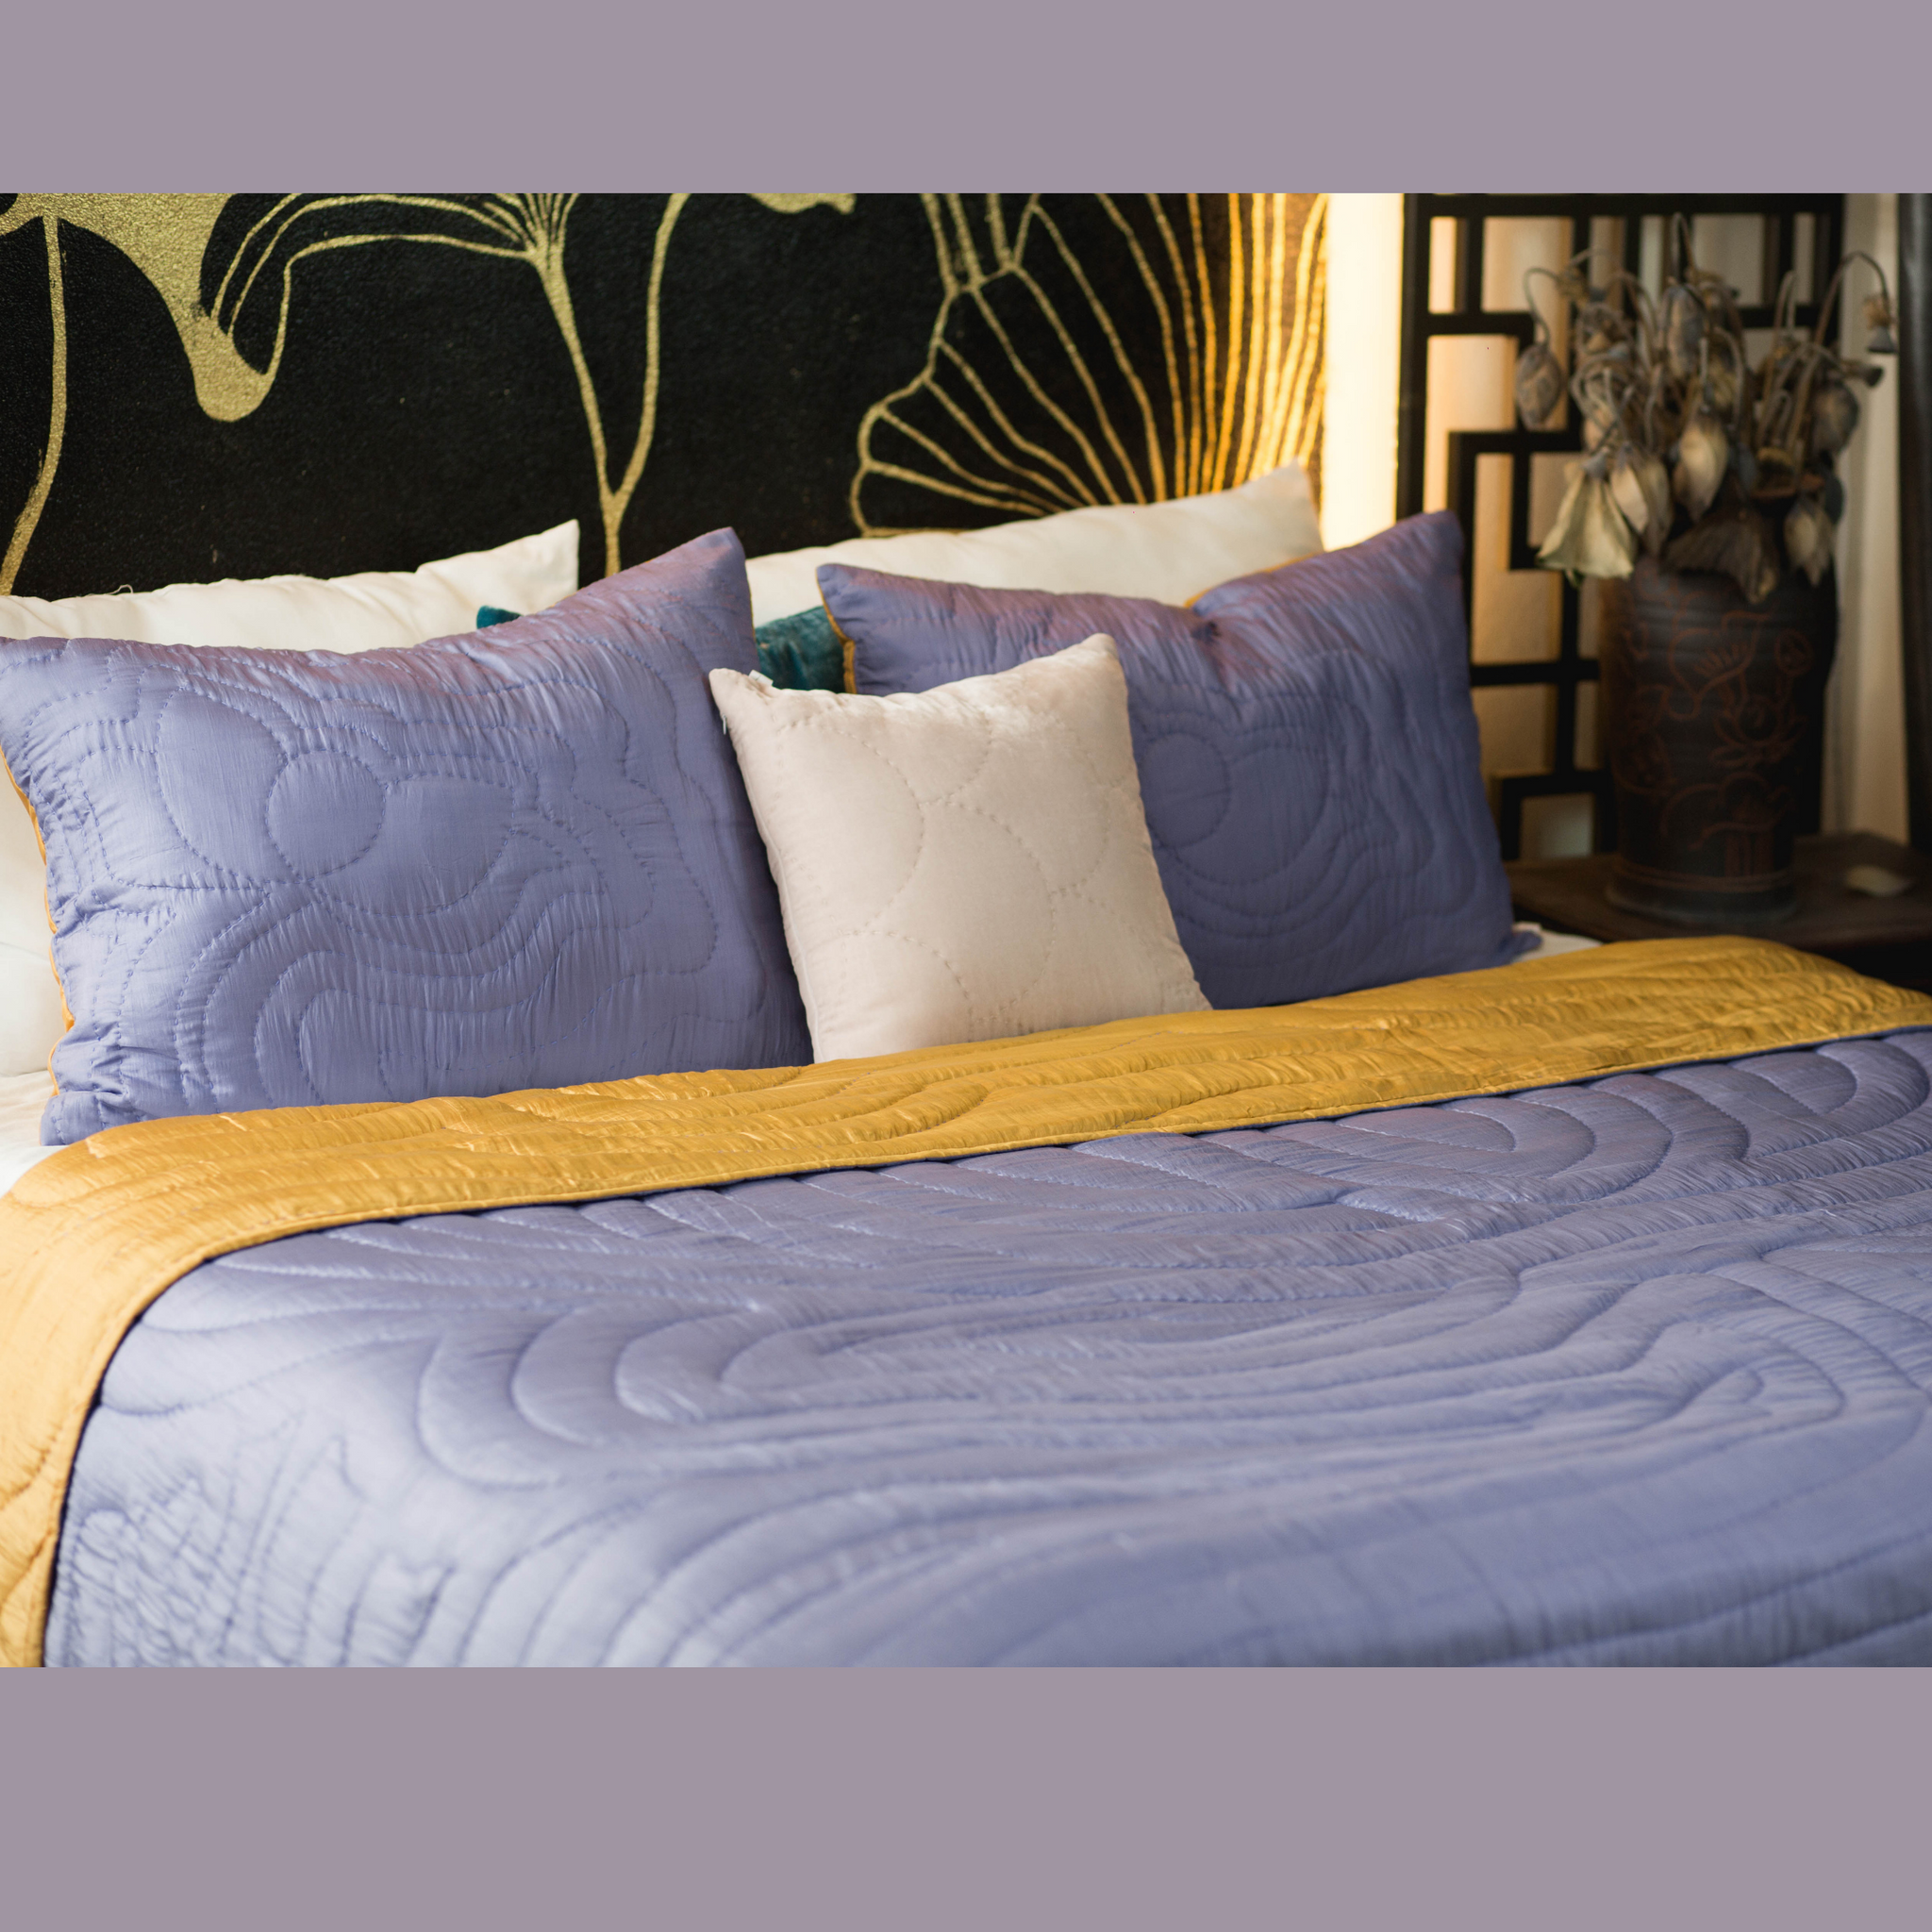 Mulberry Silk Duvet and Pillowcases-Lotus Leaf